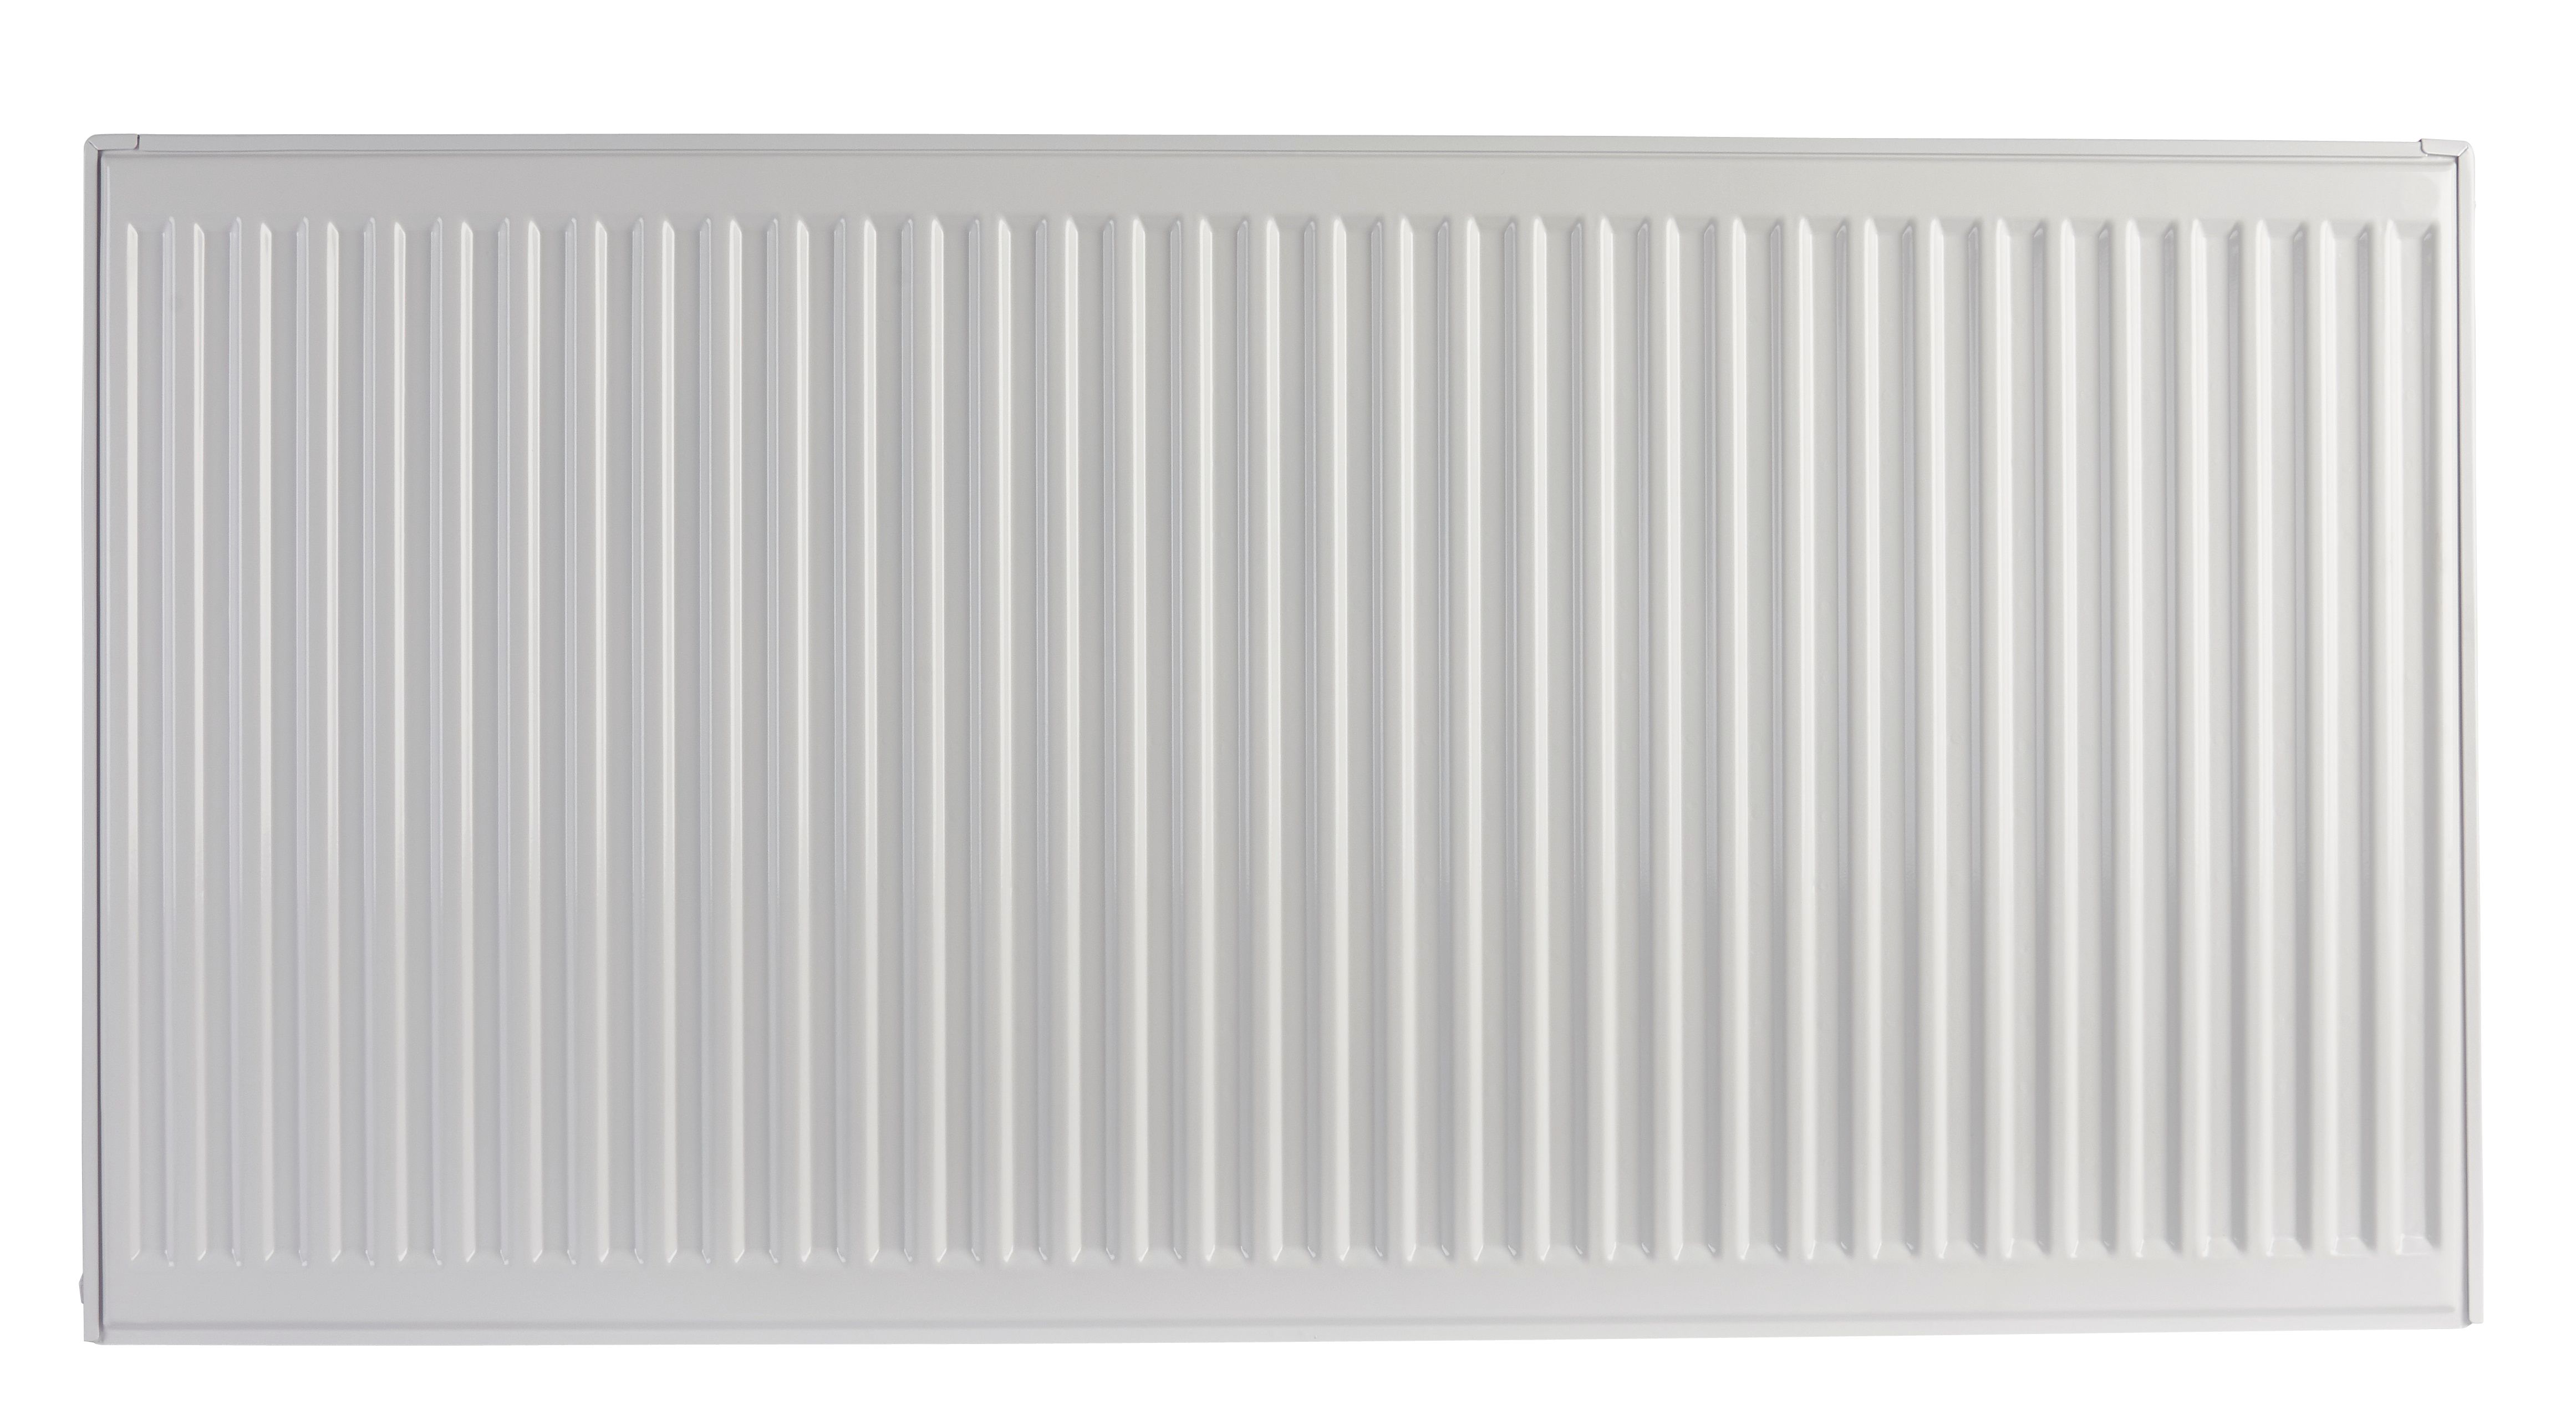 Image of Homeline by Stelrad 500 x 1400mm Type 11 Single Panel Single Convector Radiator